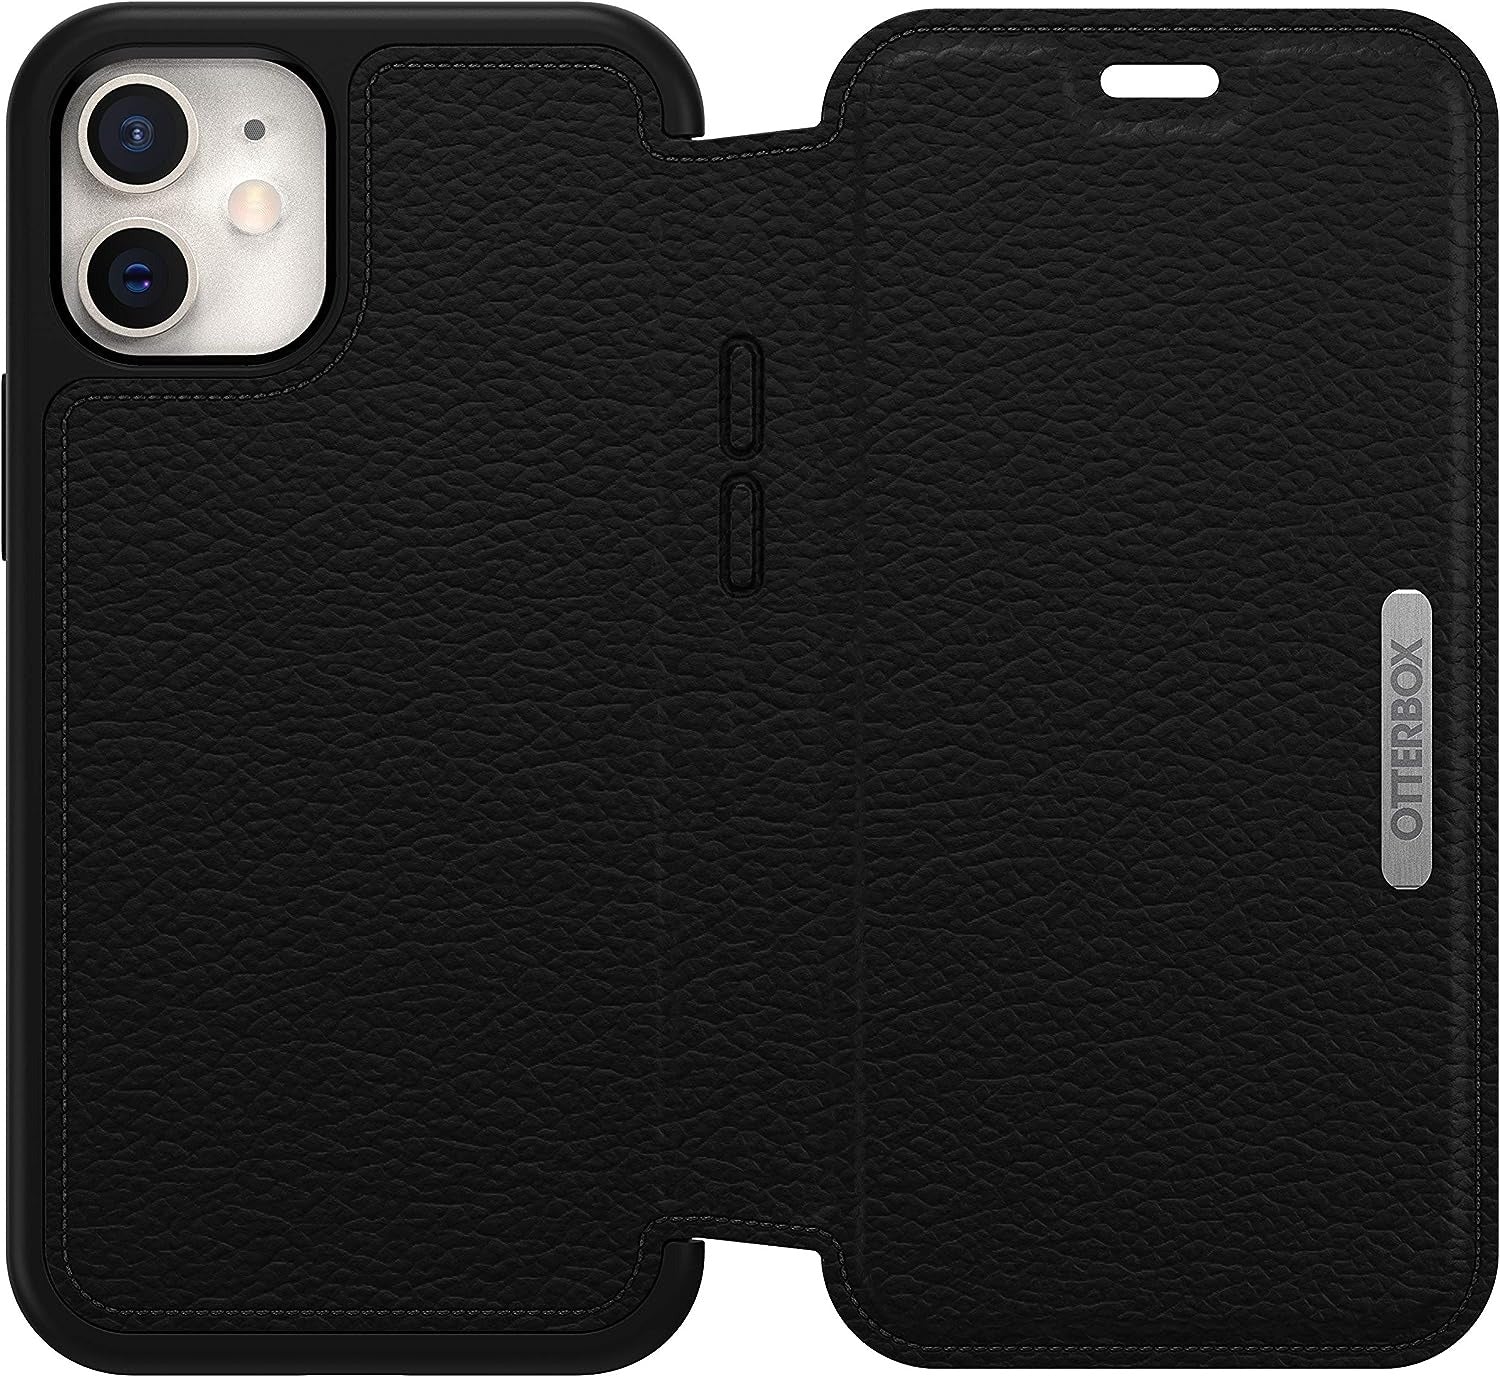 OtterBox STRADA SERIES Case for Apple iPhone 12 Mini - Shadow Black (Certified Refurbished)